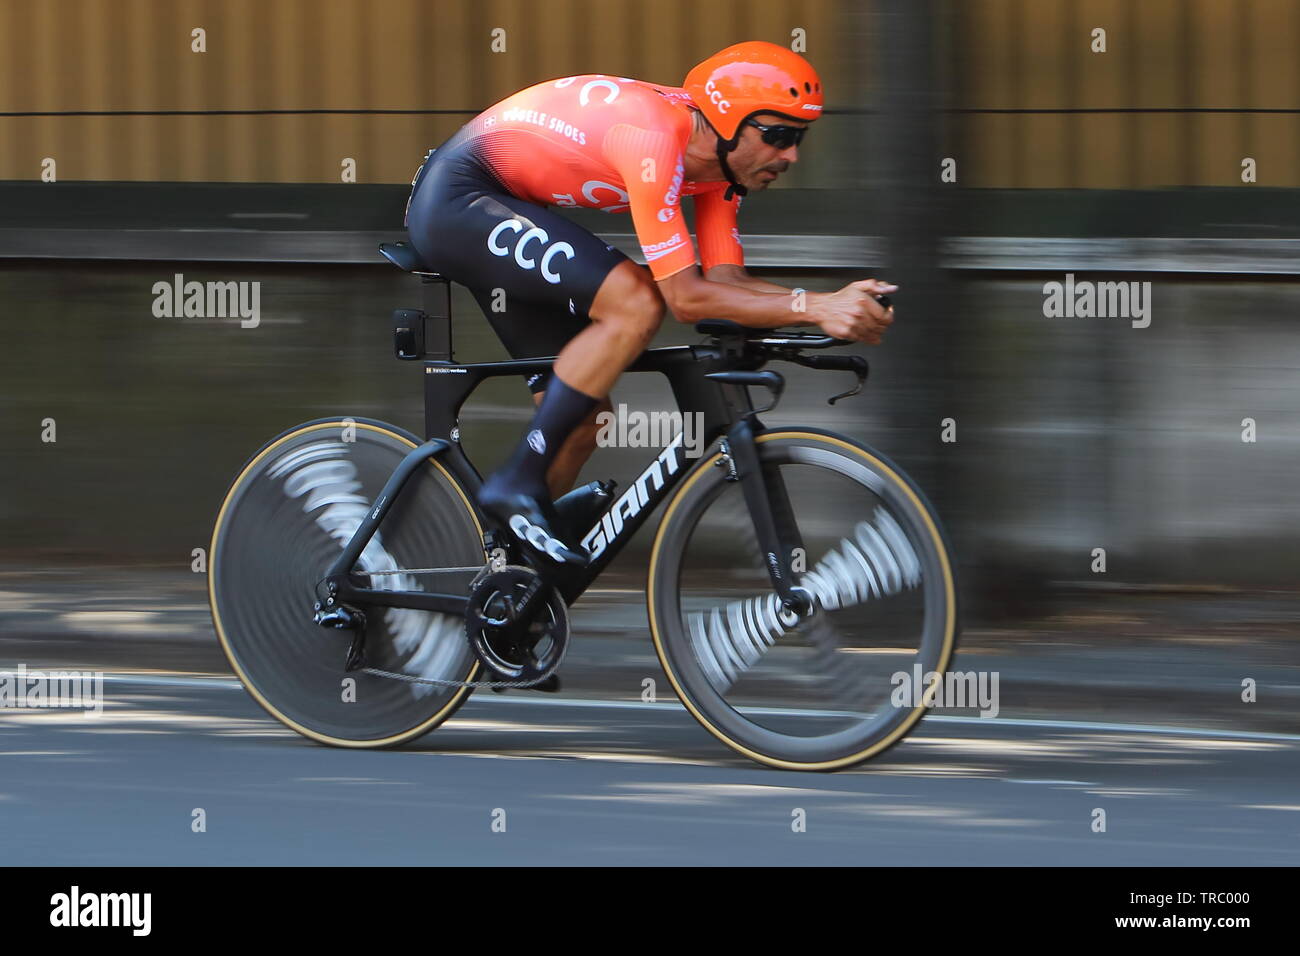 Verona, Italy. 02nd, Jun 2019. Ventoso Alberdi Francisco (CCC Team) during the last stage 21 of the 102nd Giro d' Italia, Tour of Italy 2019 - Cycle race, 17km Individual Time Trial from Verona Fair along Torricelle in Verona city, to finish in Arena of Verona in Verona, Italy, 03 June 2019. (PHOTO) Alejandro Sala/Alamy News Stock Photo